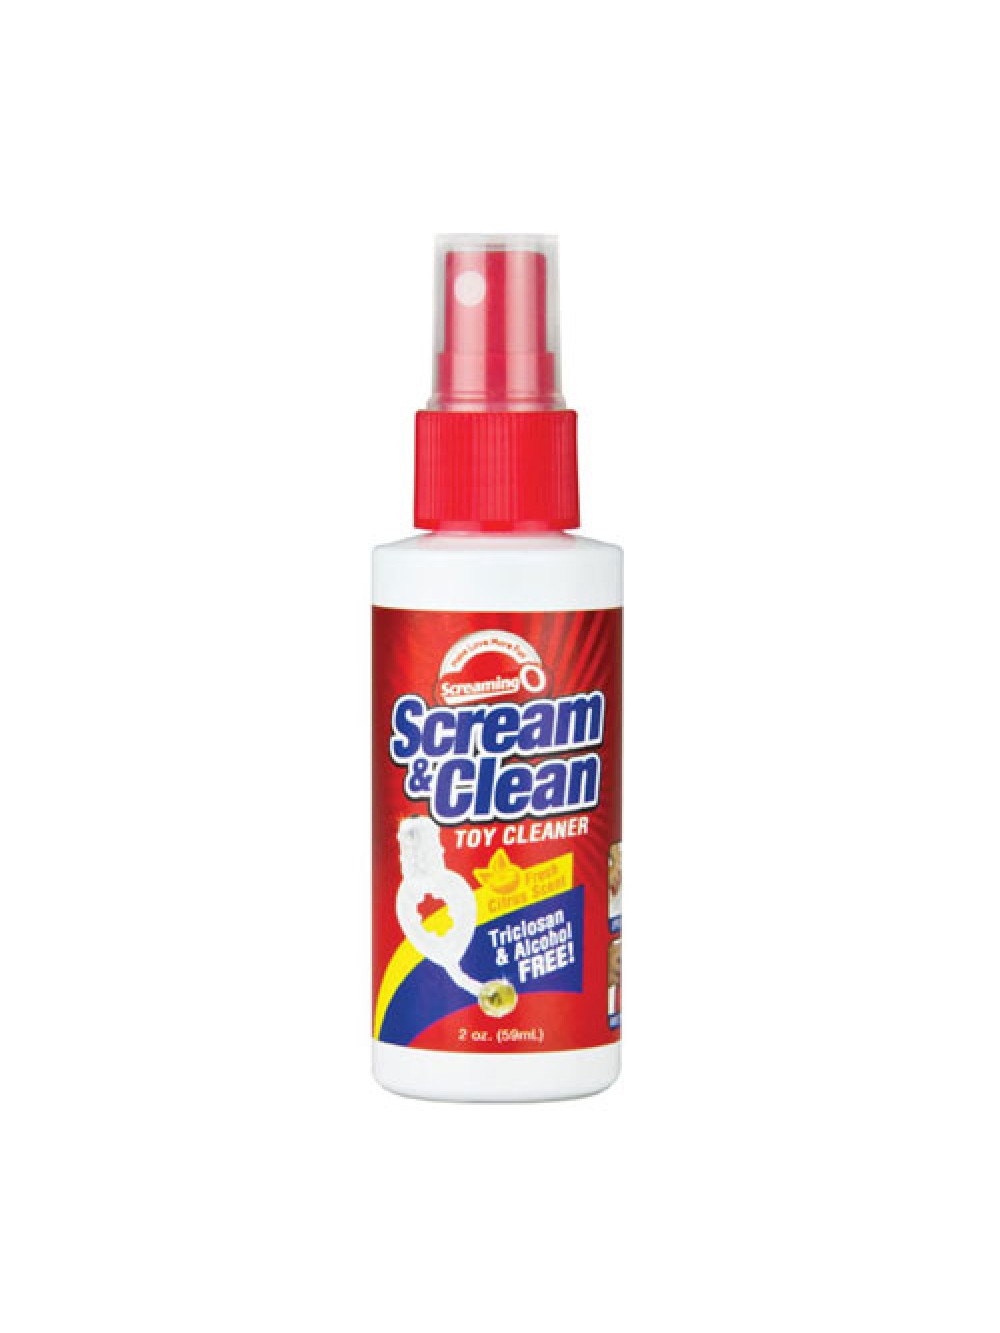 Screaming O Scream And Clean Toy Cleaner 817483010712